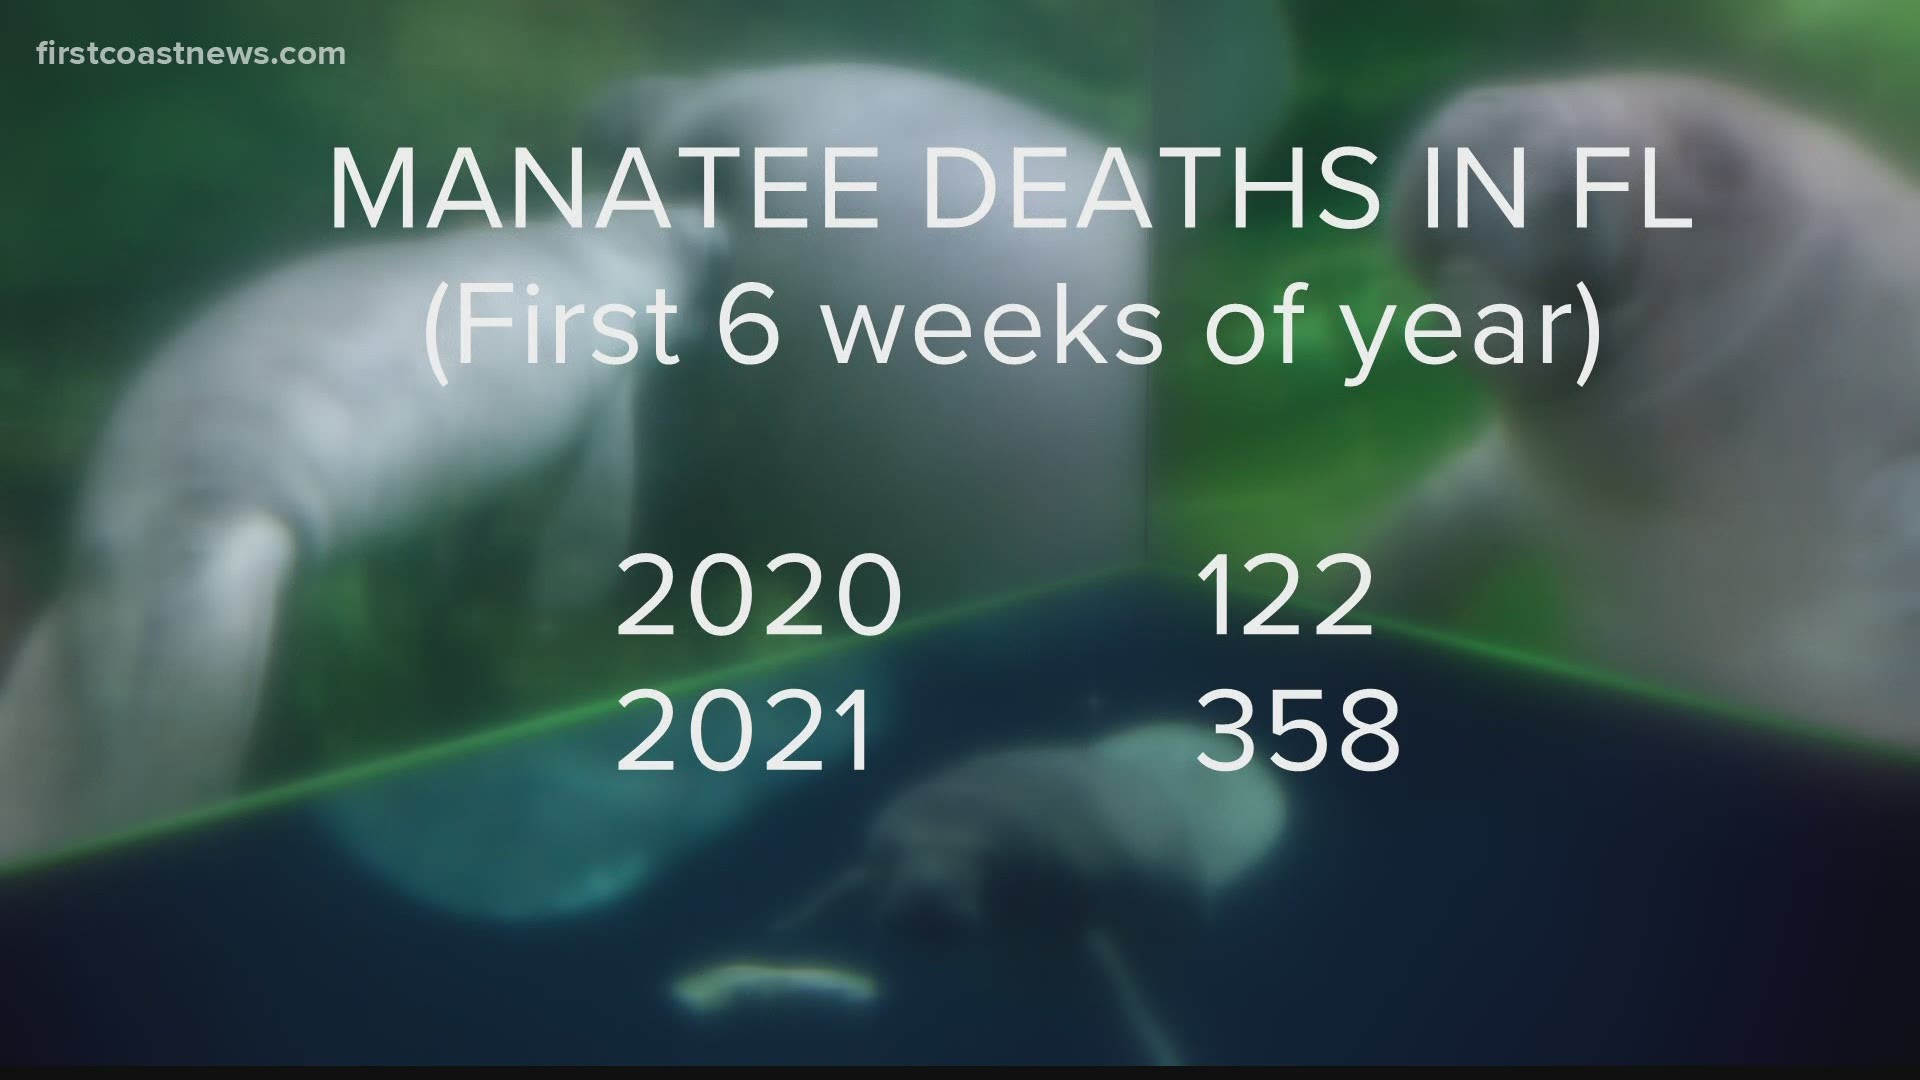 The number of reported manatee deaths so far in 2021 has equaled more than half the total number of manatee deaths reported in 2020.